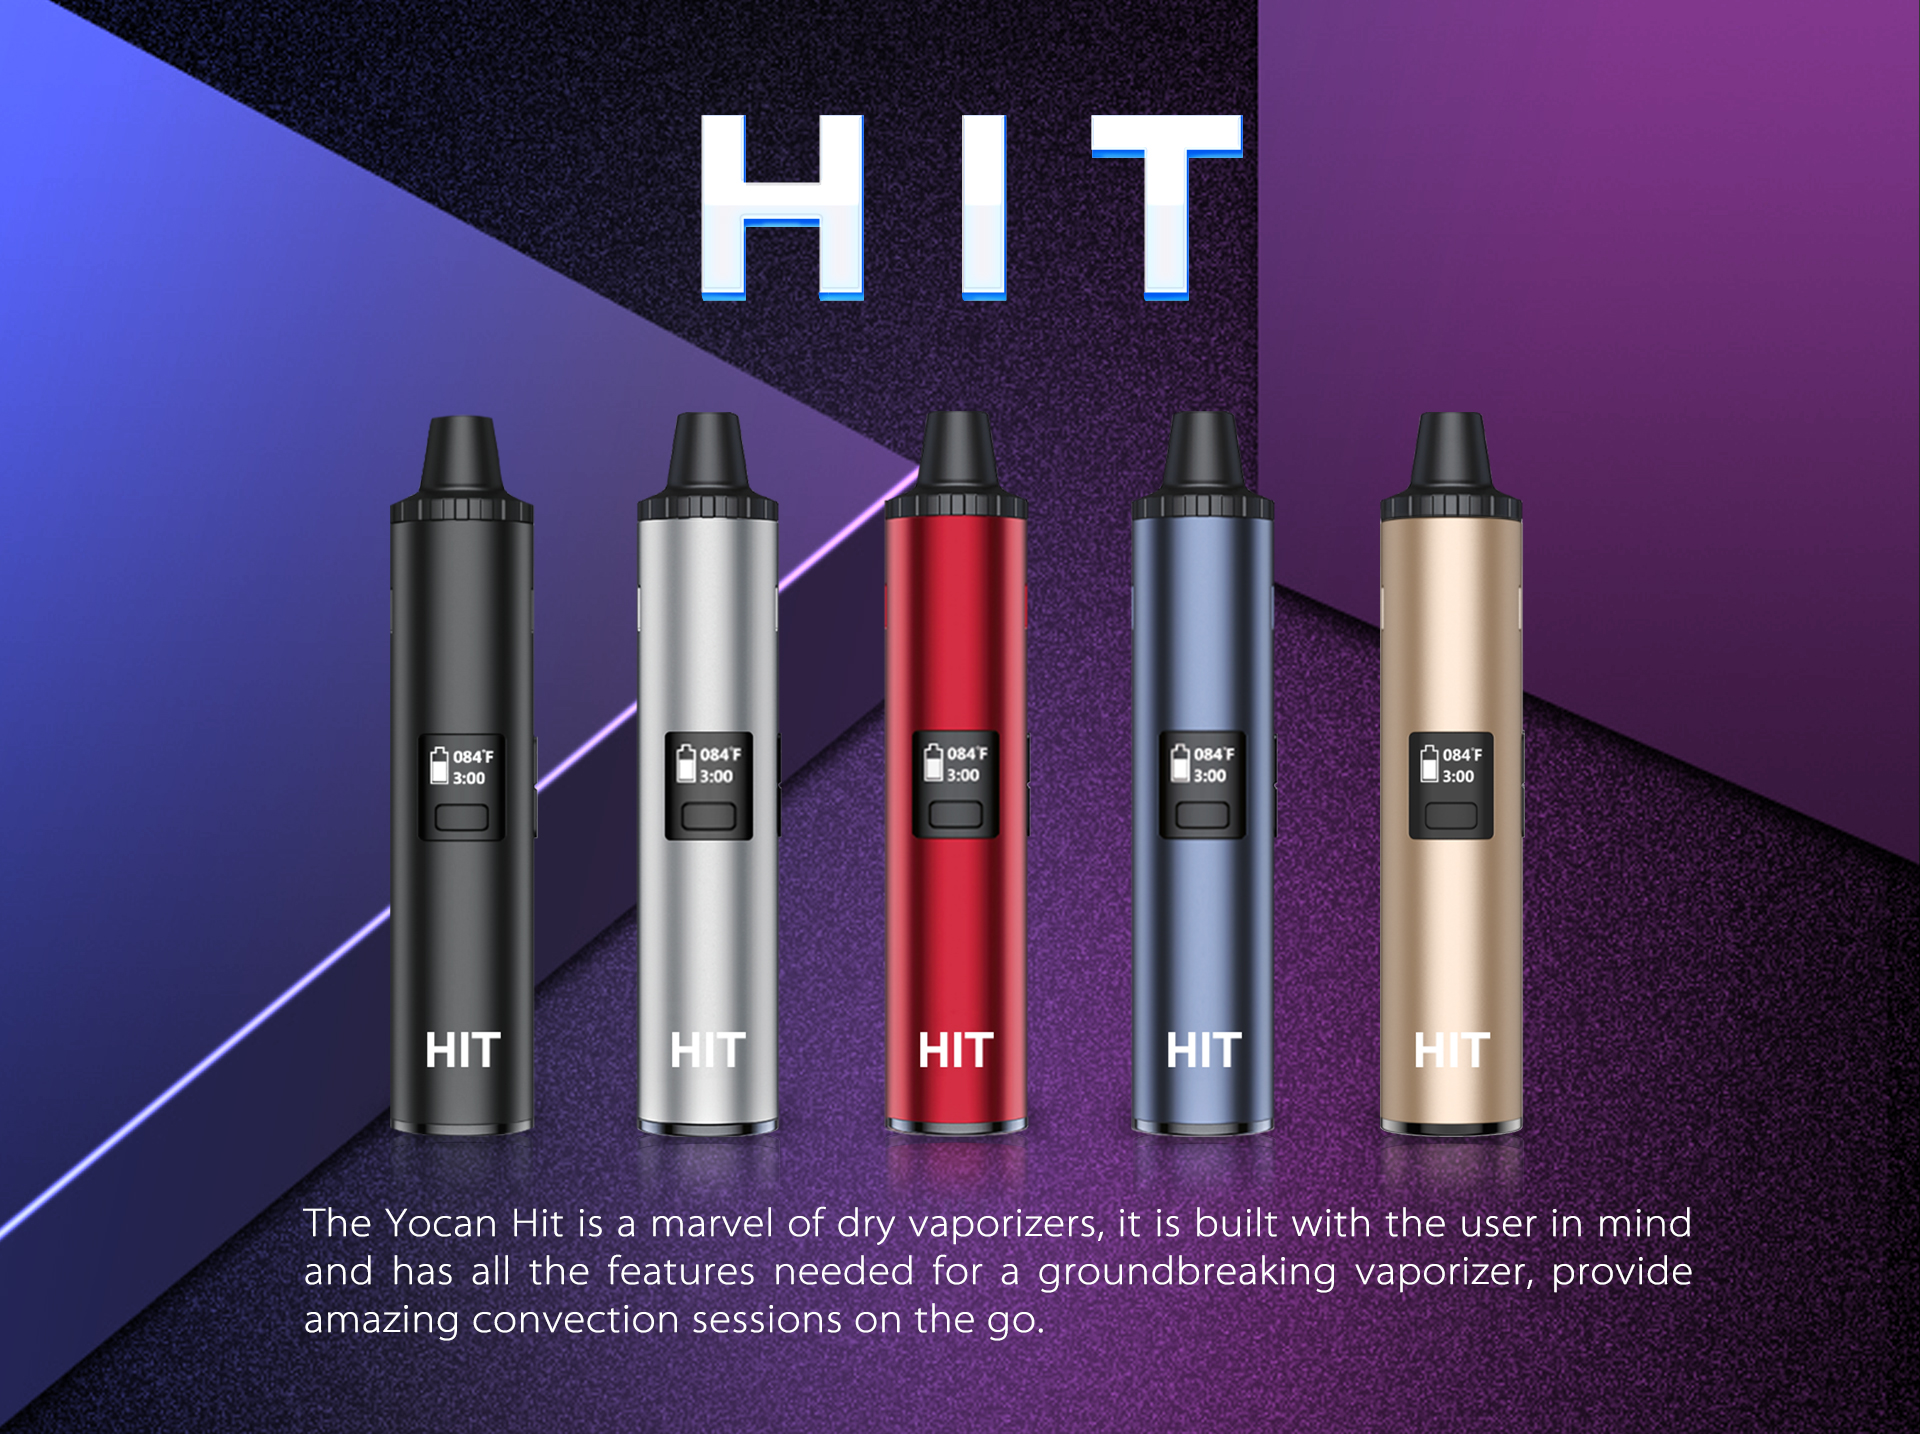 The Yocan Hit is a marvel of dry vaporizer.